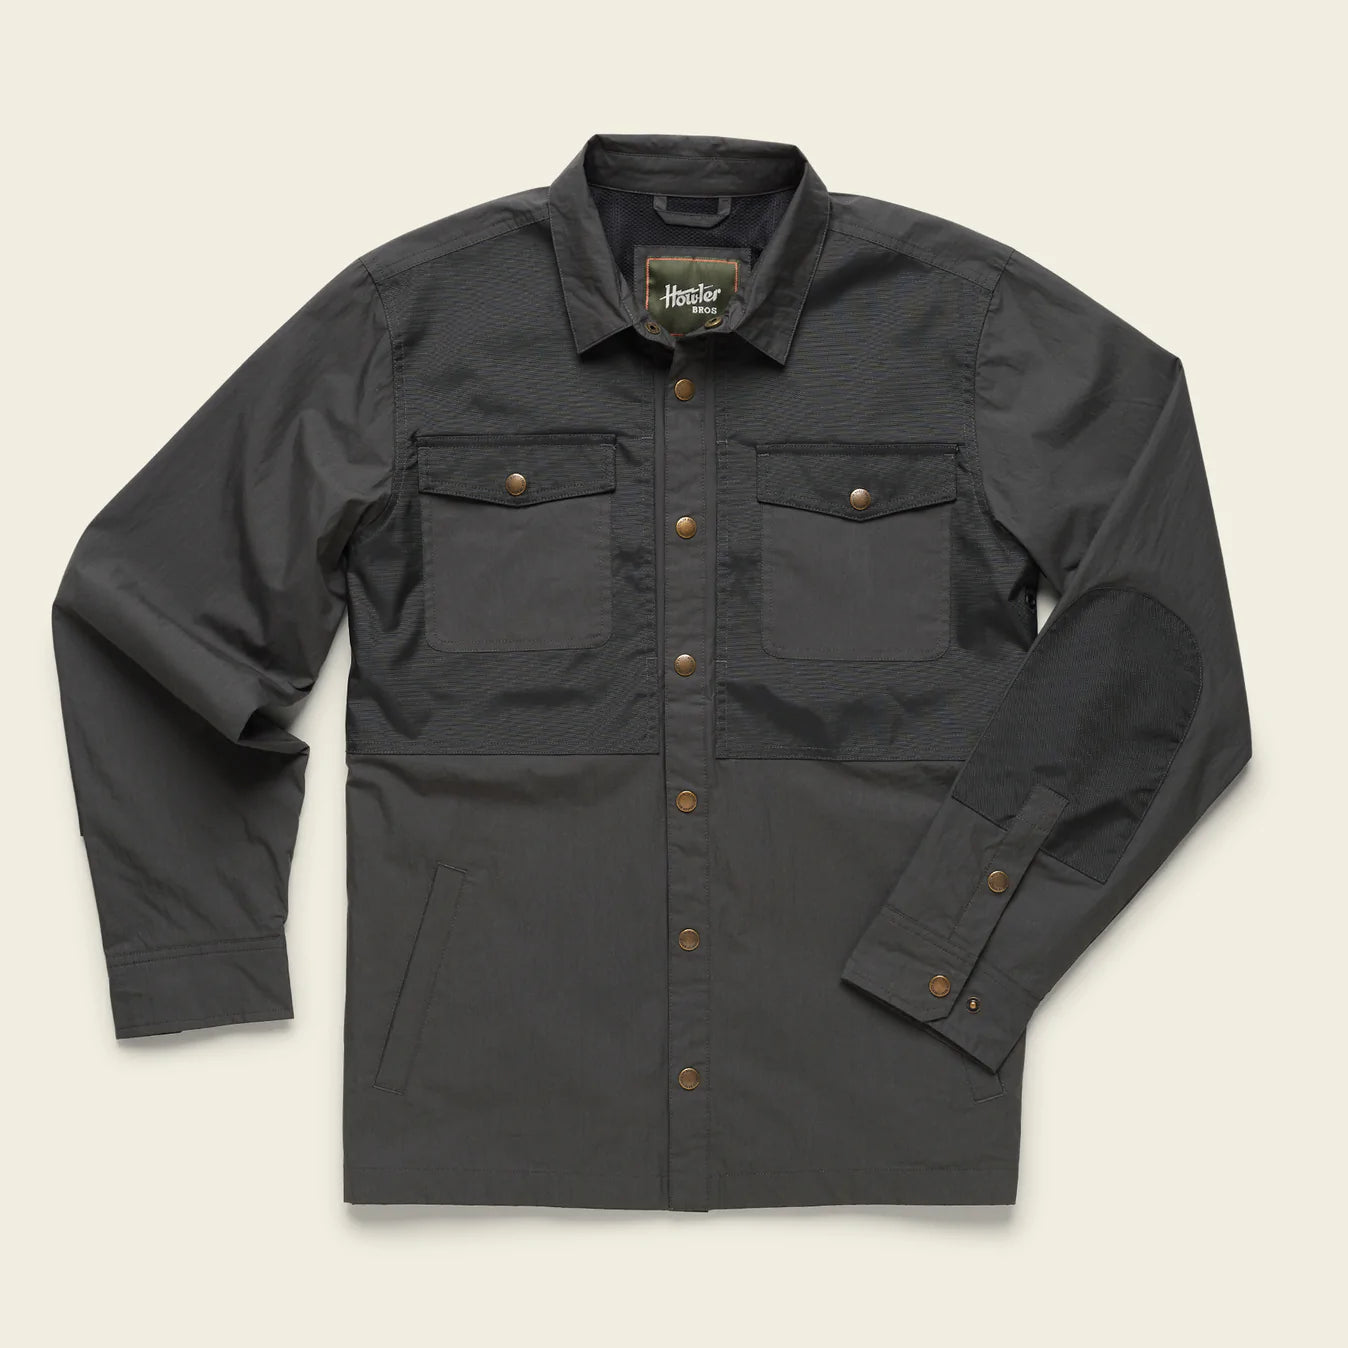 Howler Brothers Manakin Stable Coat SALE Now 40% Off!